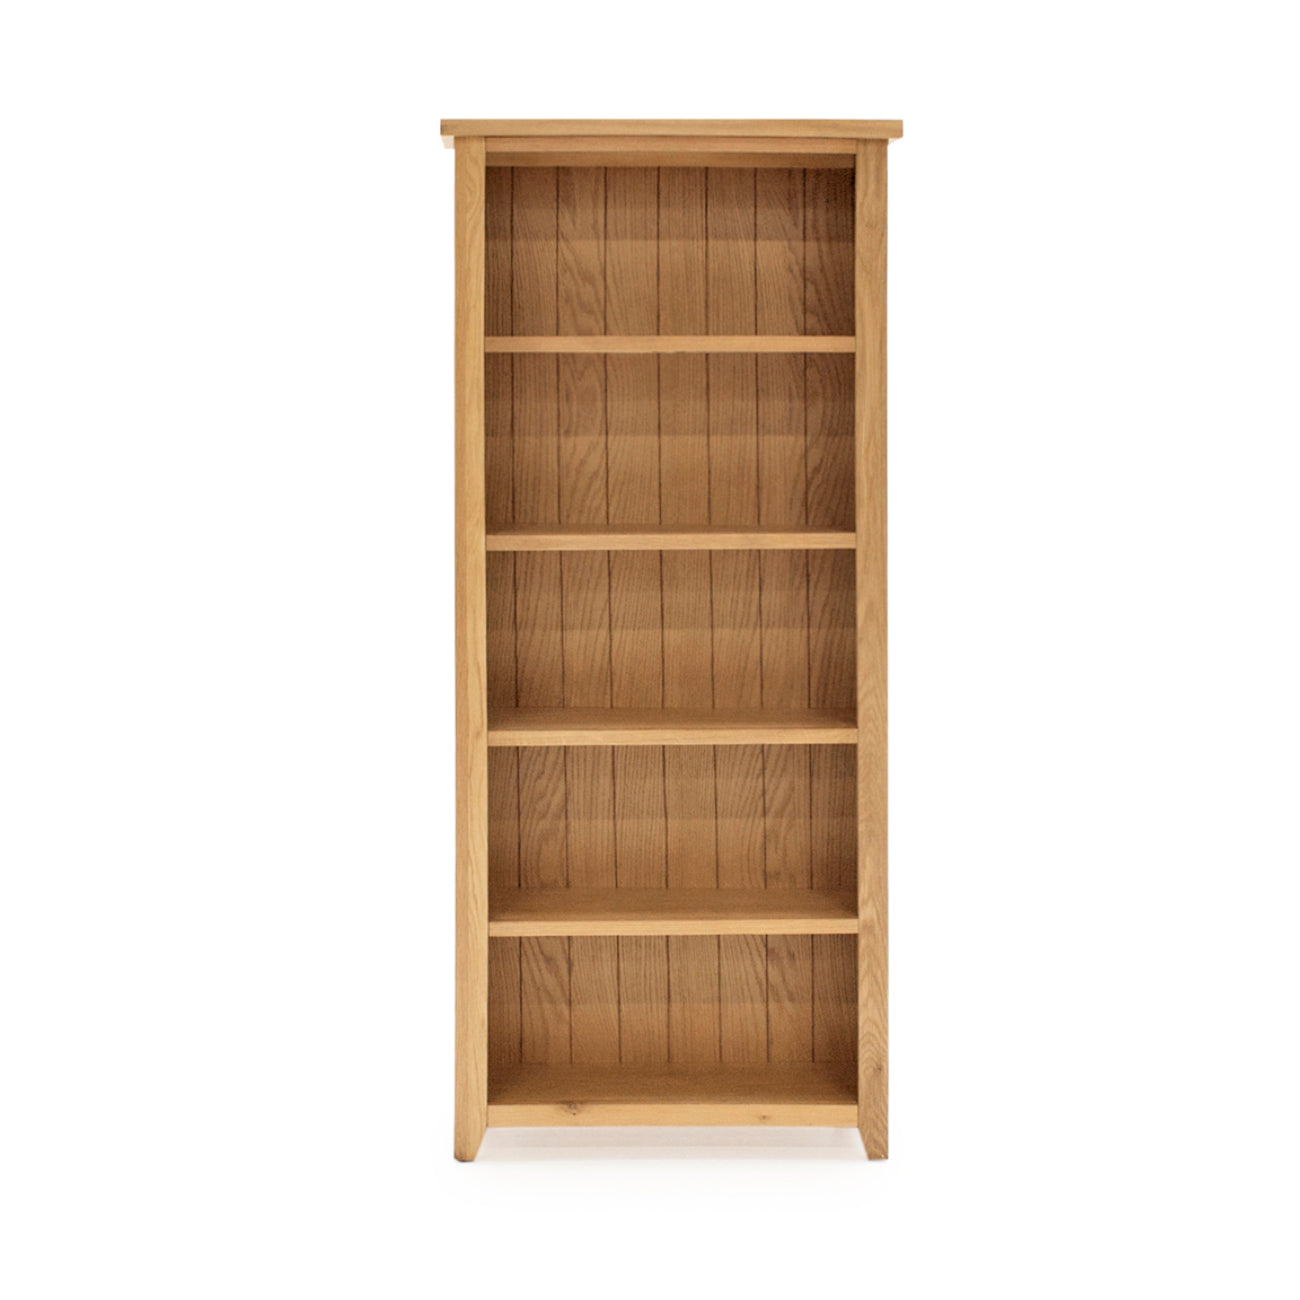 Ramore Large Bookcase